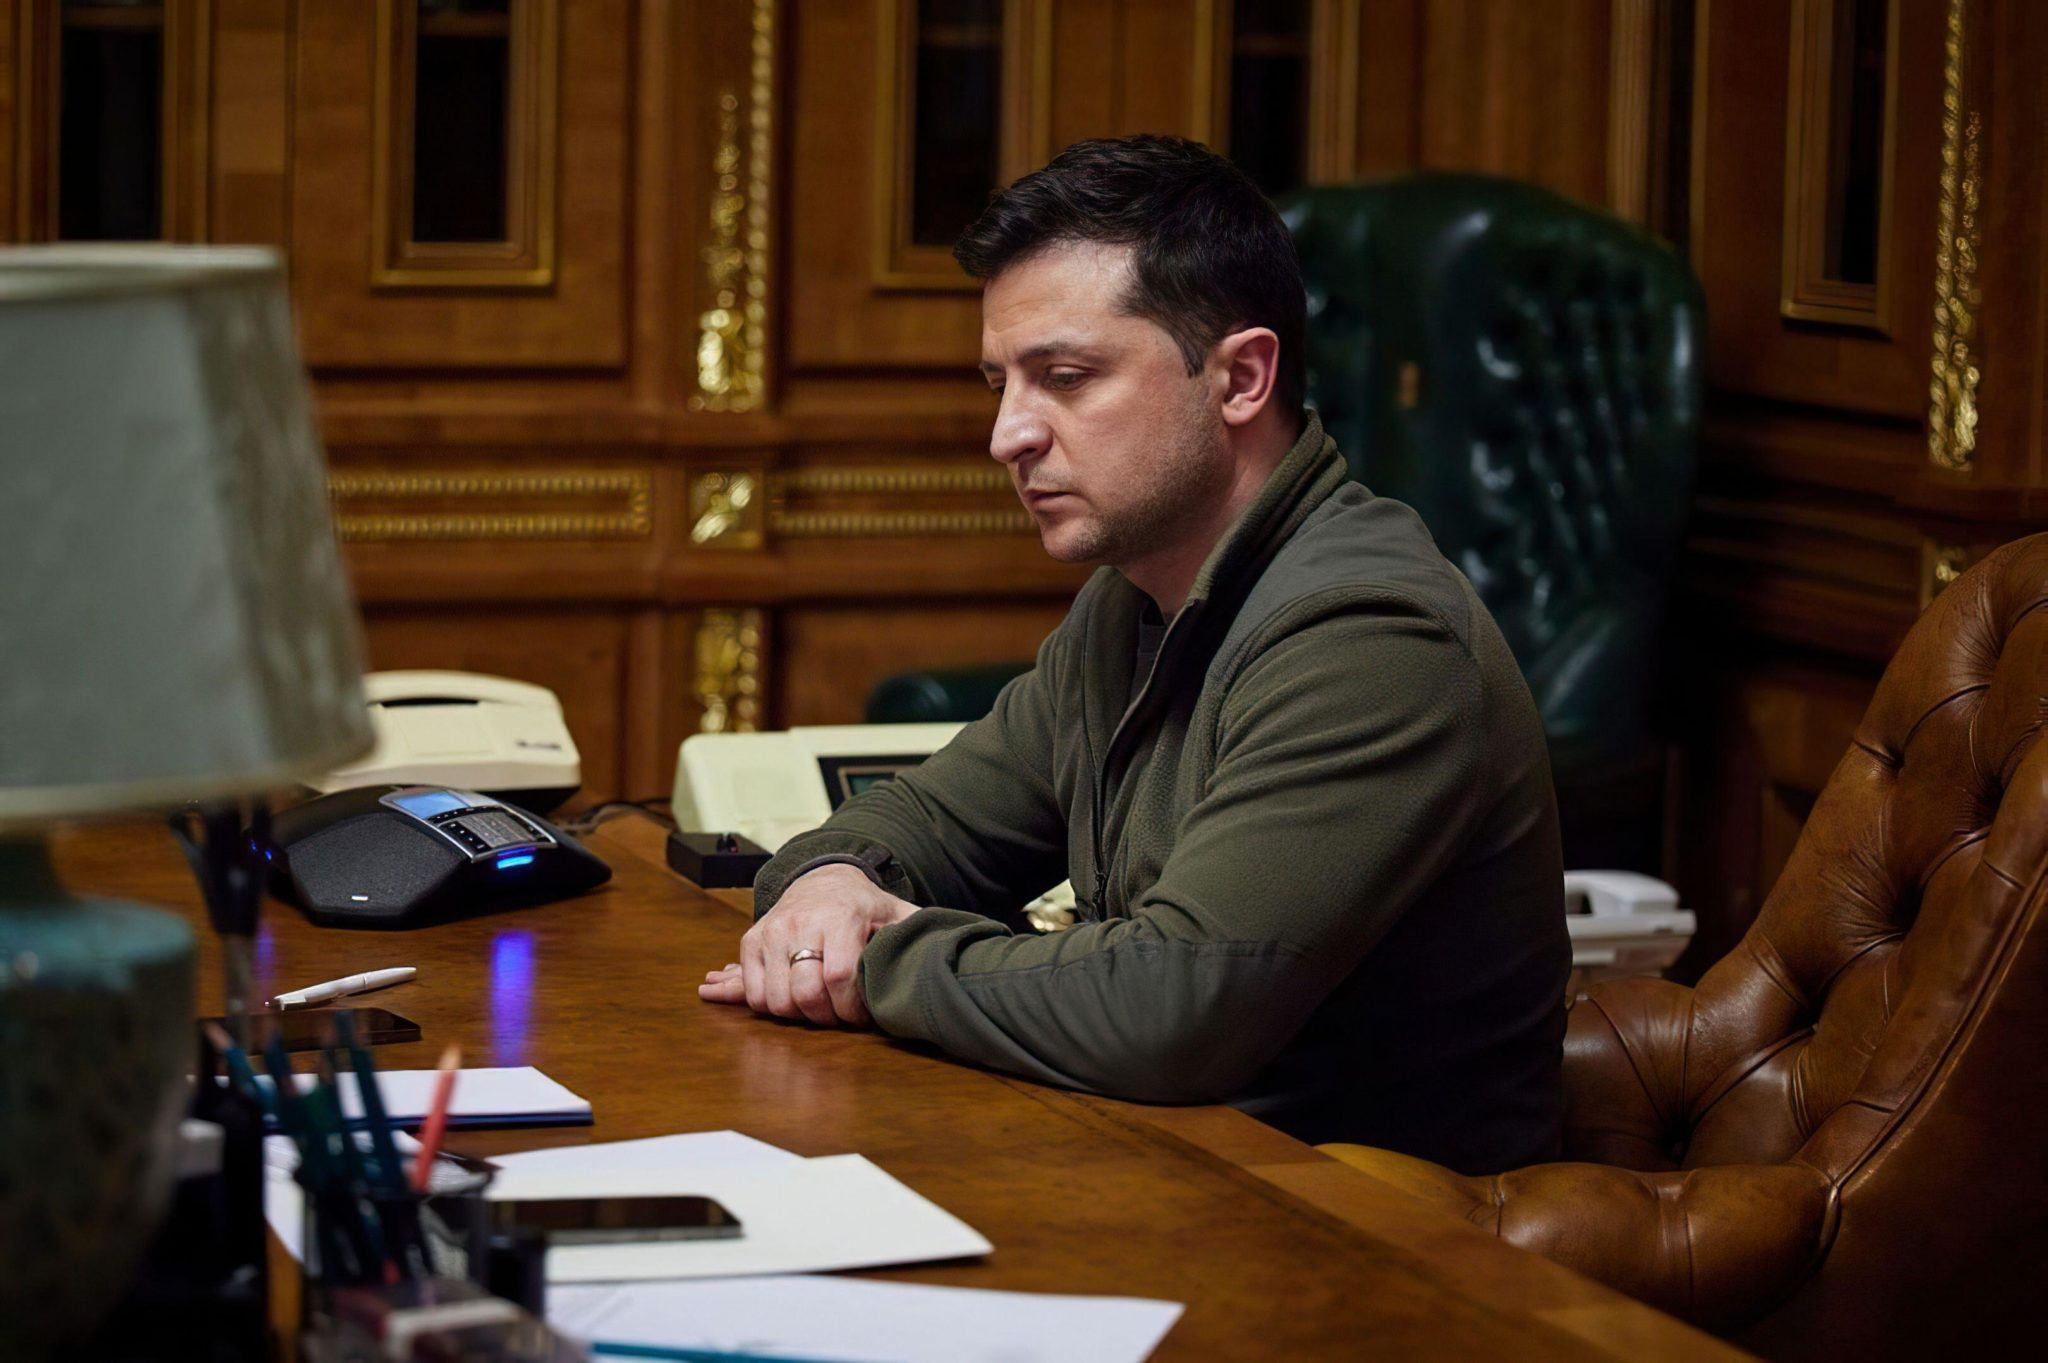 Ukranian President Volodymyr Zelenskyy speaks with the international press as he prepares for Russian invasion, 08-03-2022. Image: American Photo Archive / Alamy Stock Photo